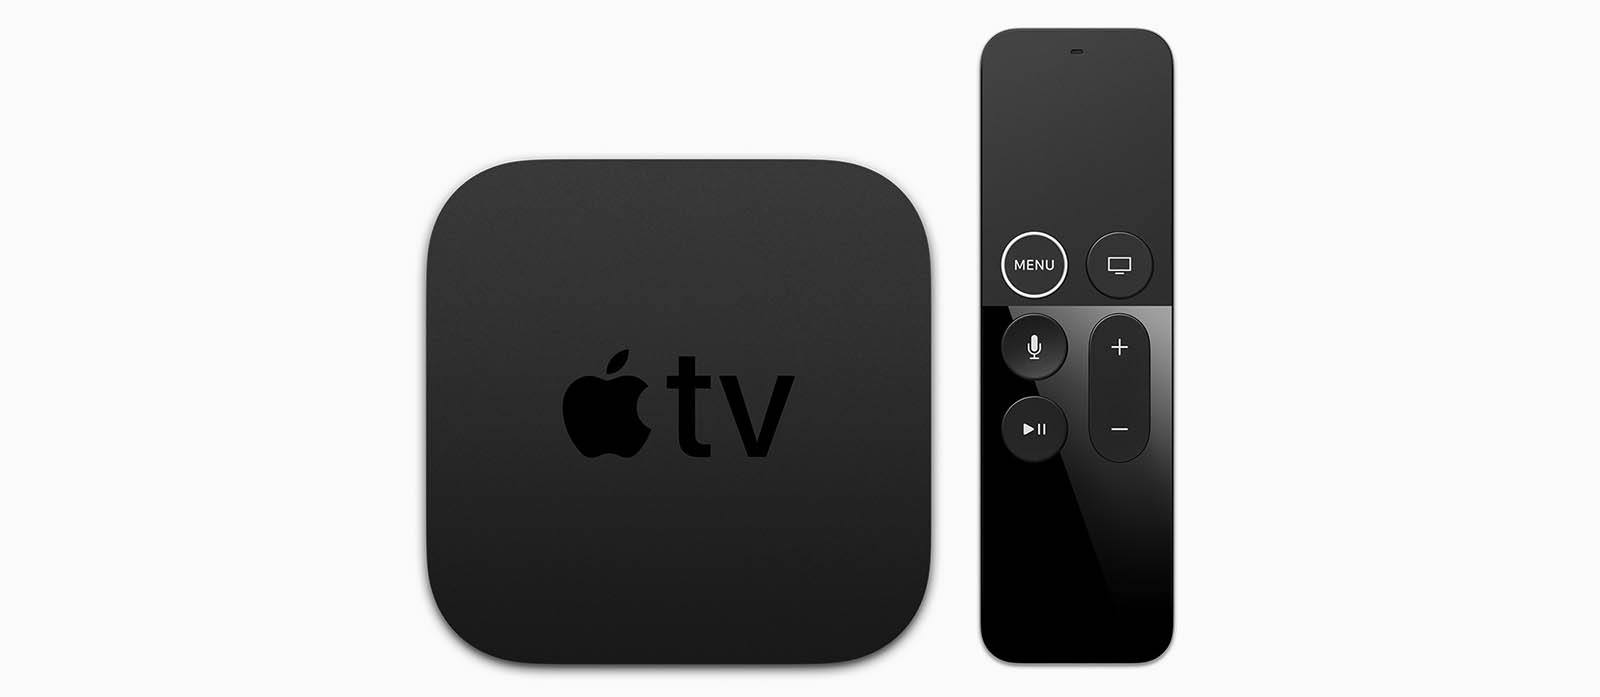 An overhead view of an Apple TV 4K and its remote control